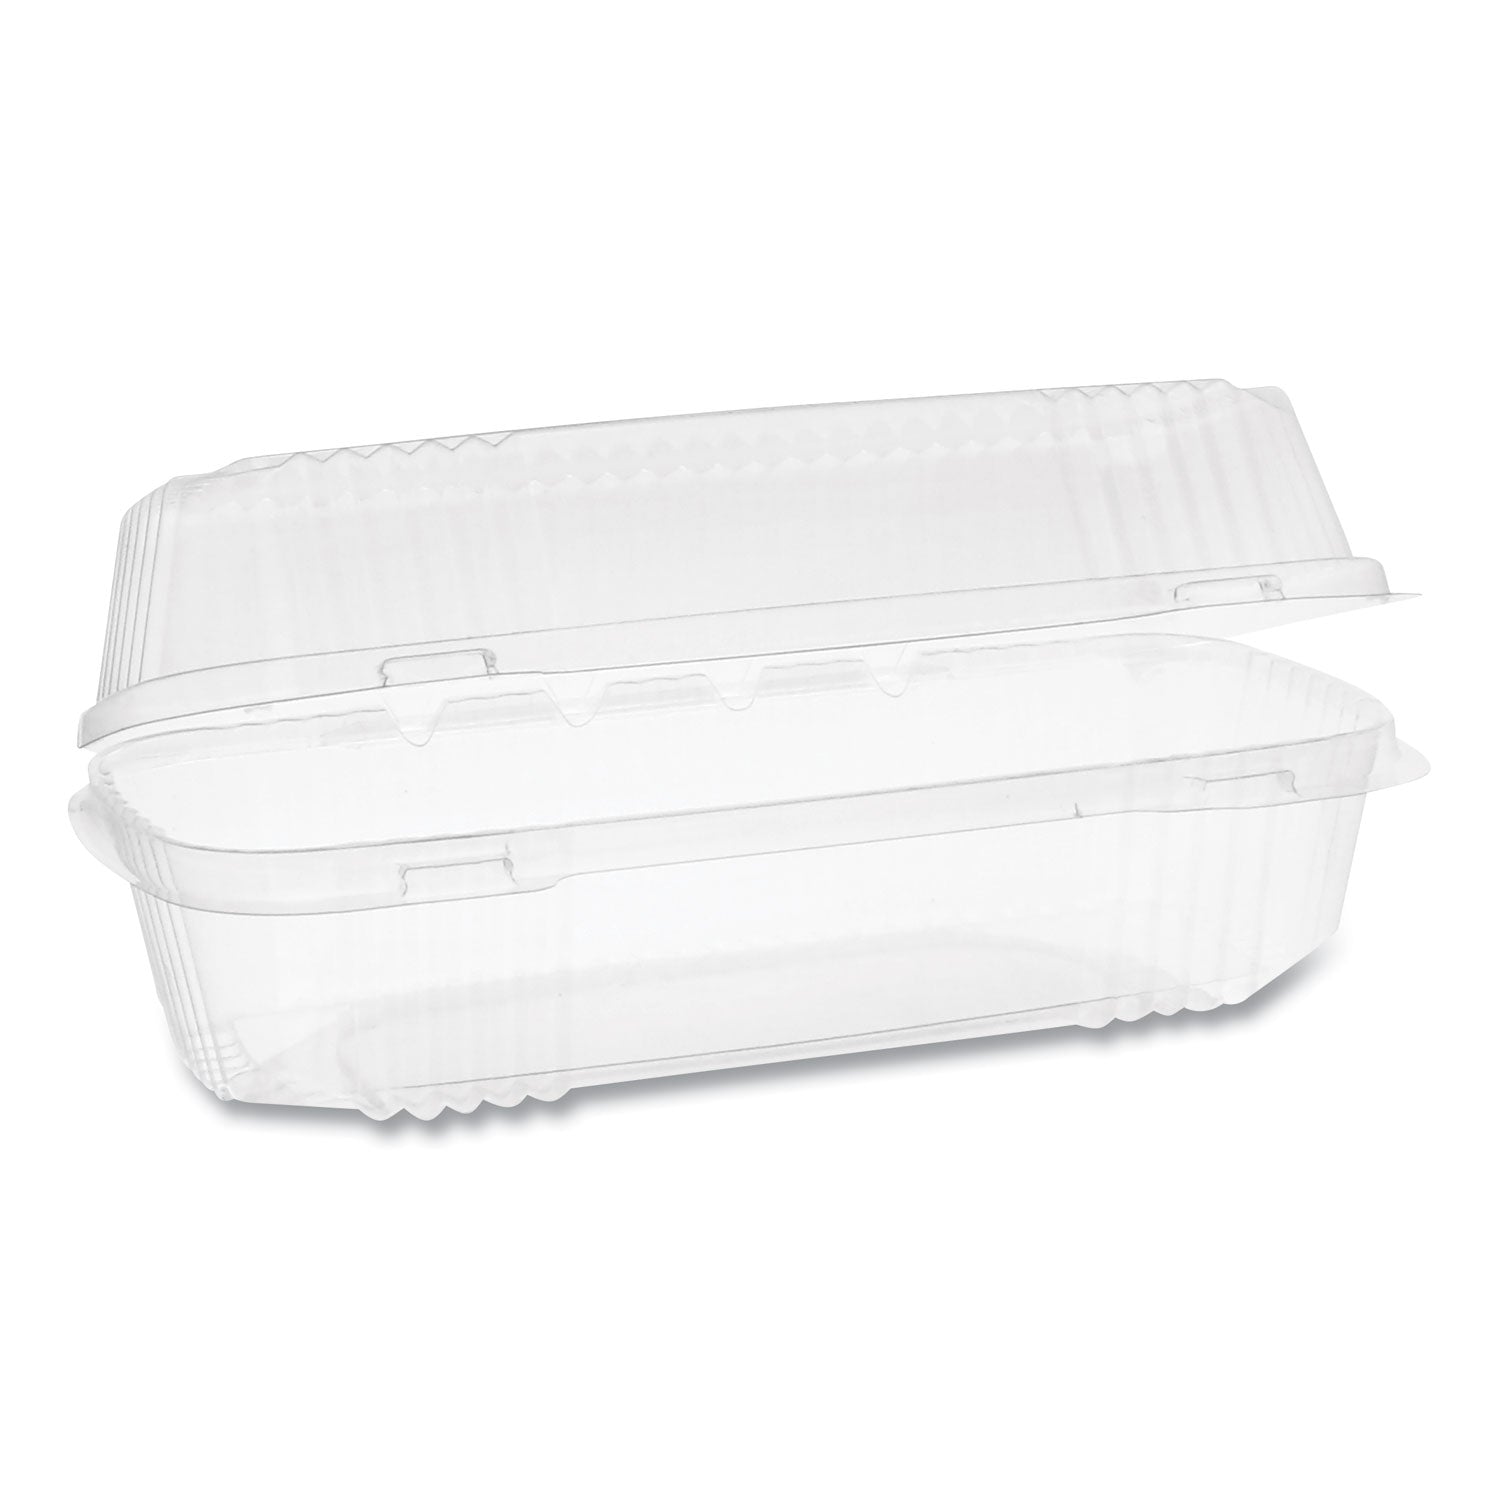 clearview-smartlock-hinged-lid-container-hoagie-container-27-oz-925-x-45-x-3-clear-plastic-250-carton_pctyci81049 - 1